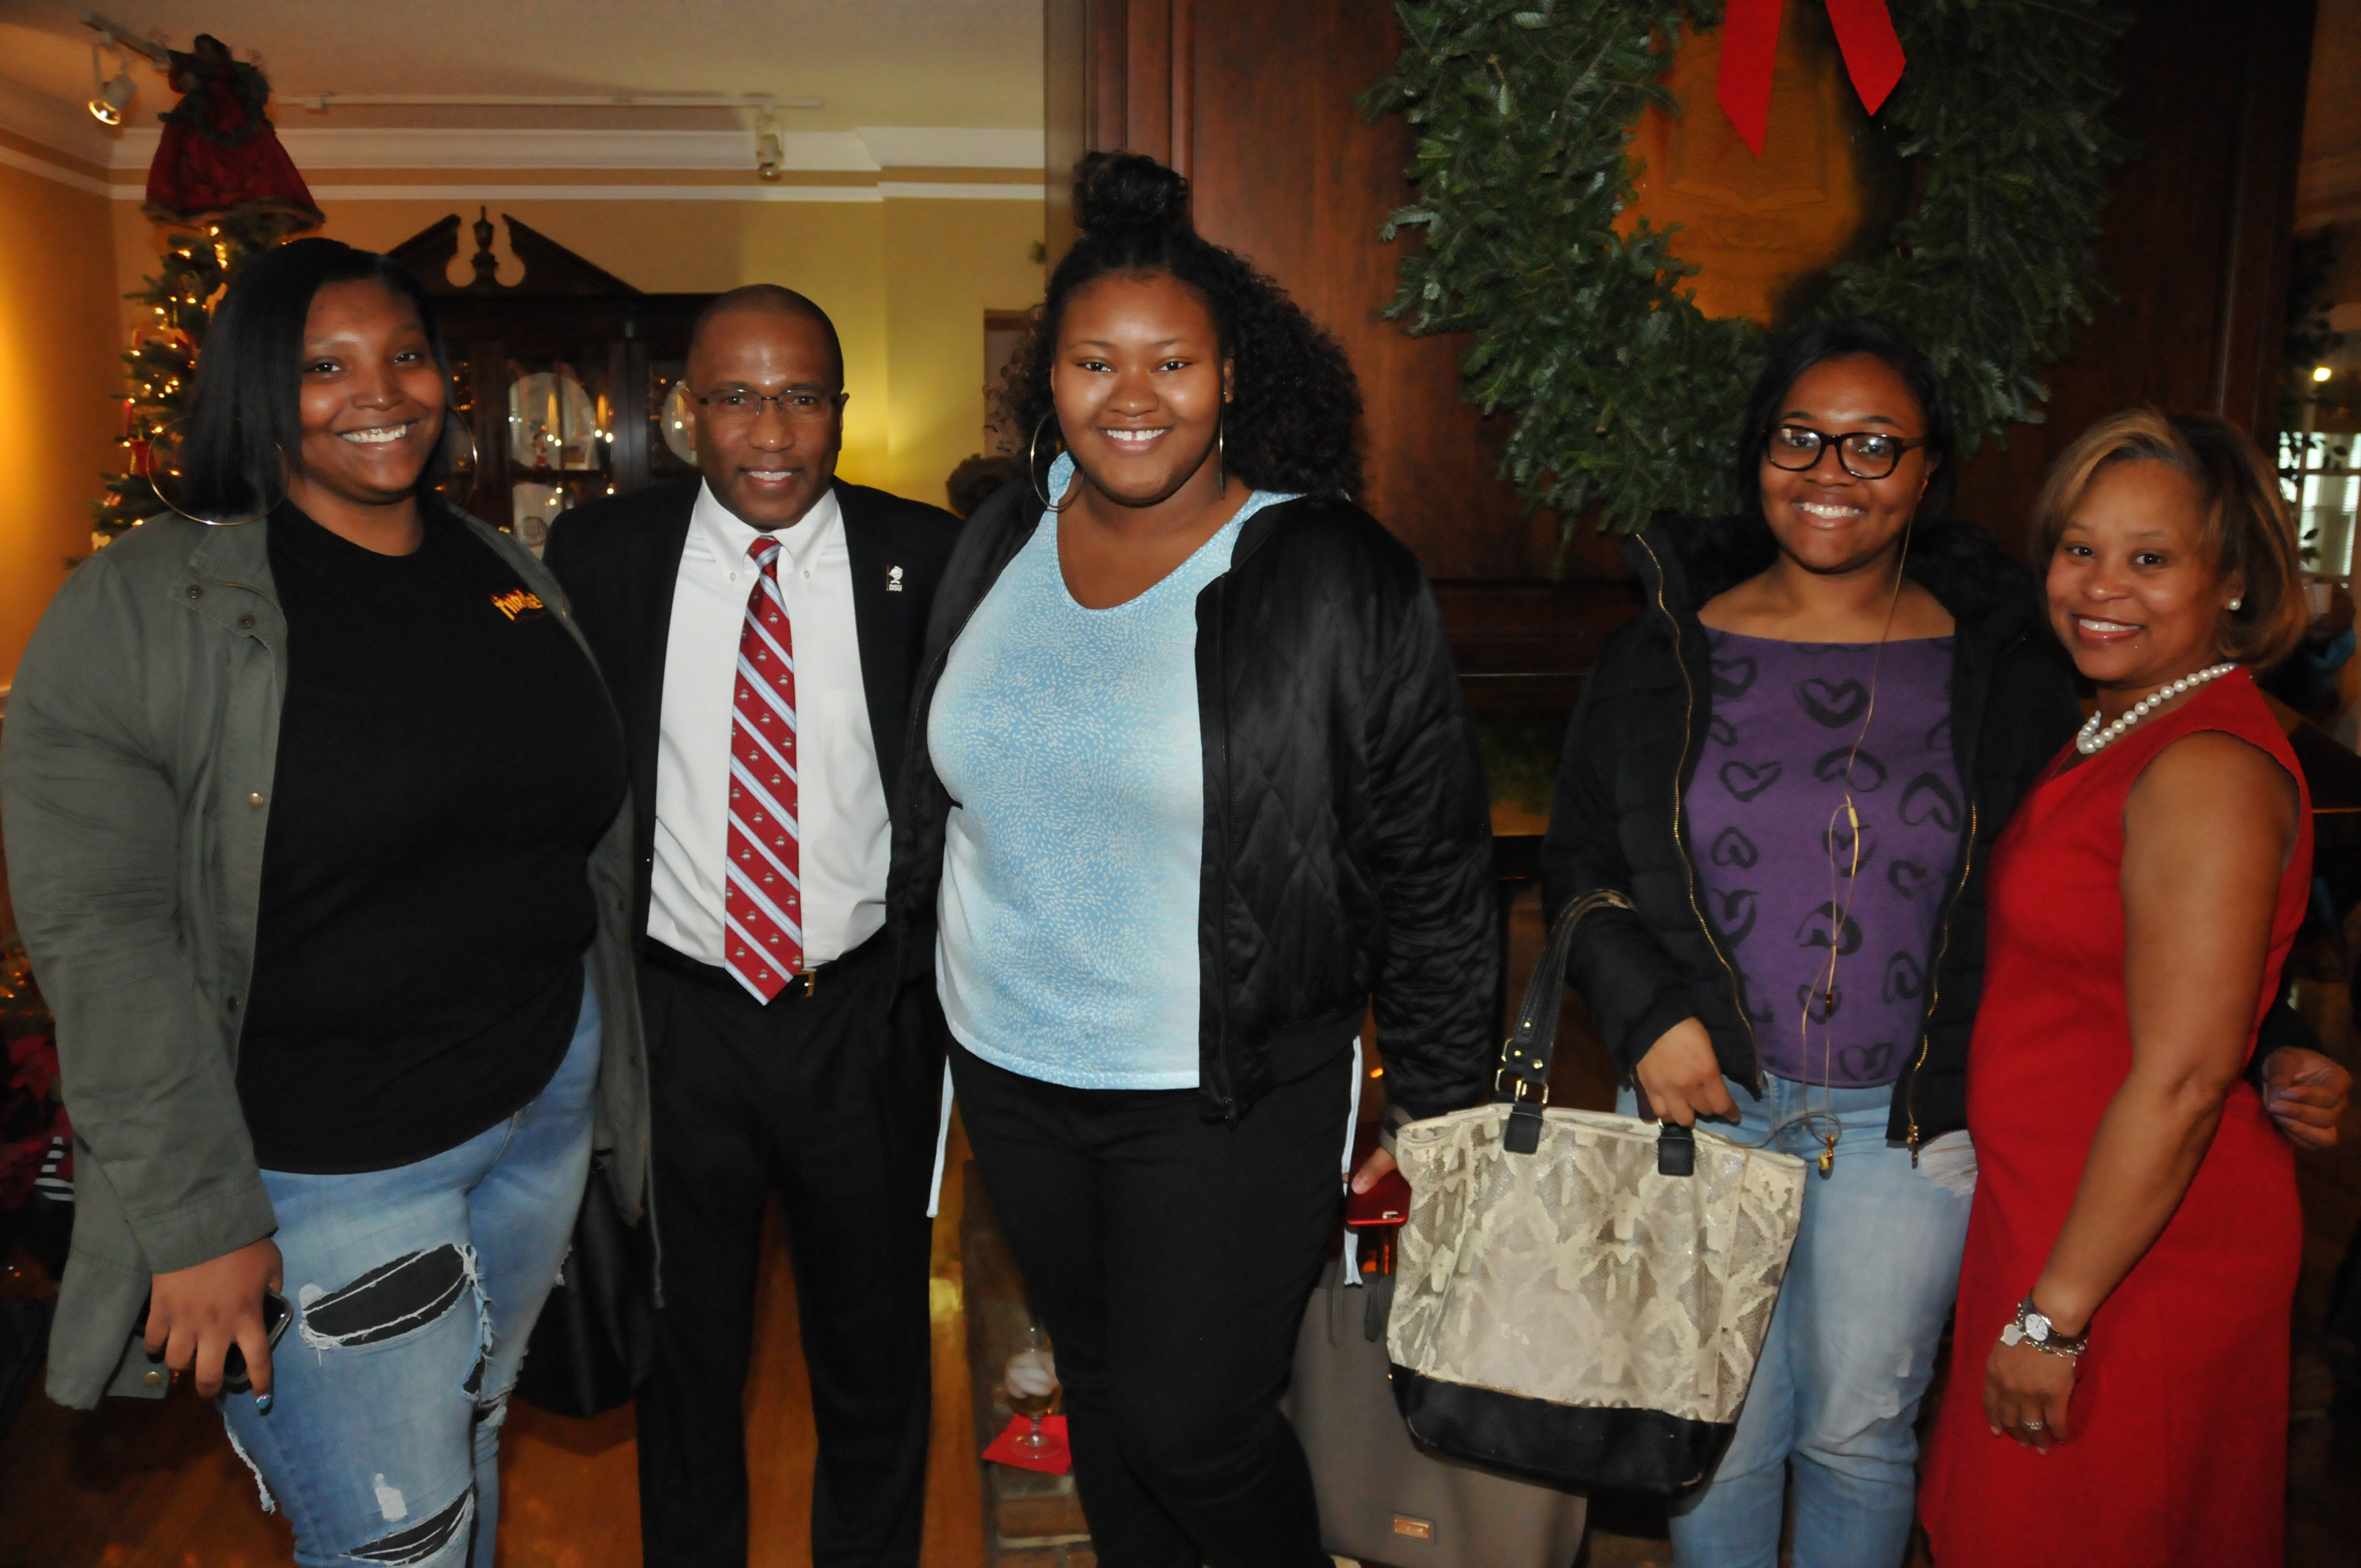 DSU President Harry L. Williams and First Lady Dr. Robin Williams pose with a group DSU students during their Christmas celebration at their residence.